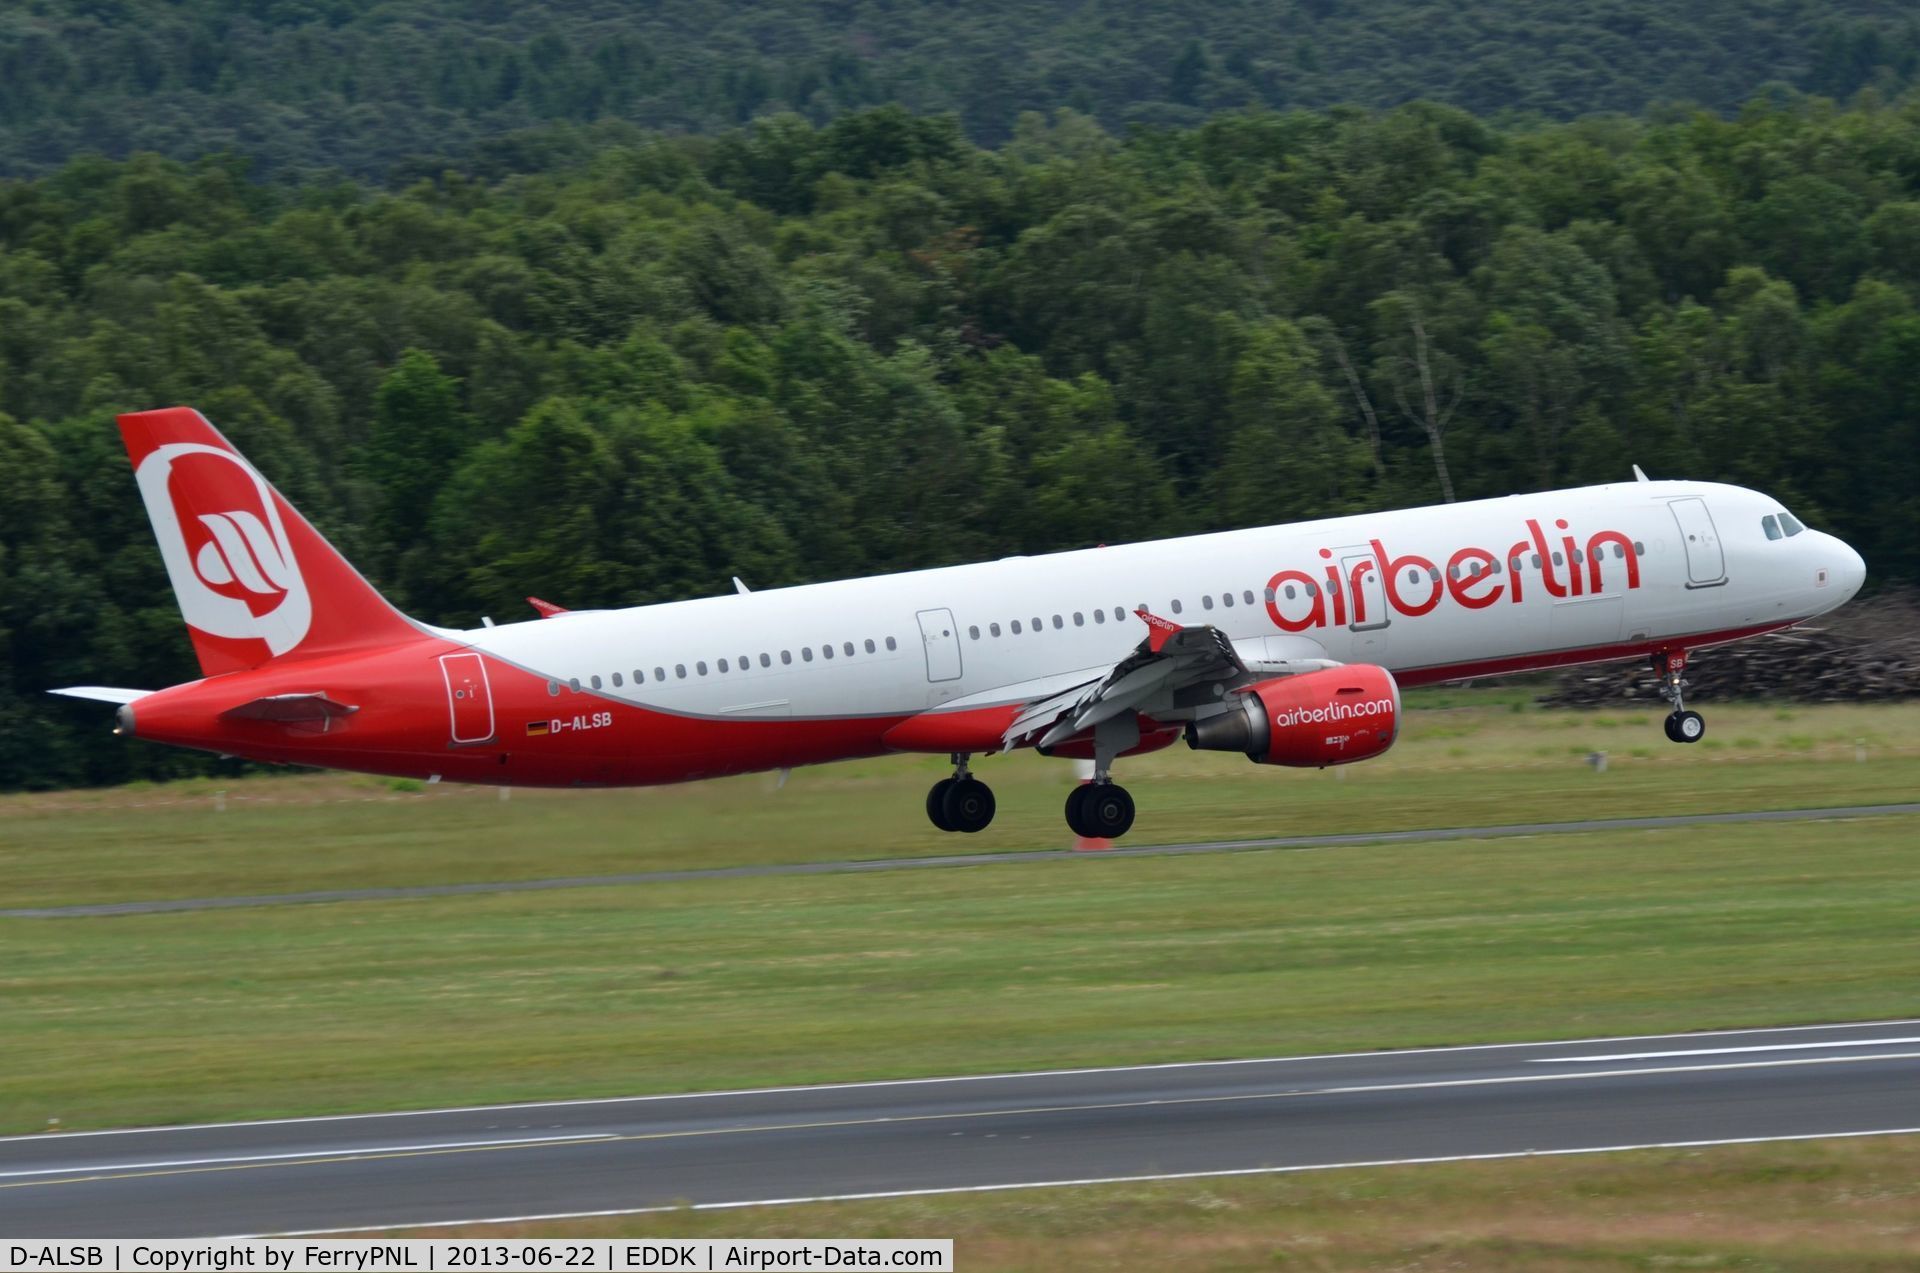 D-ALSB, 2003 Airbus A321-211 C/N 1994, Air Berlin A321 about to touch down